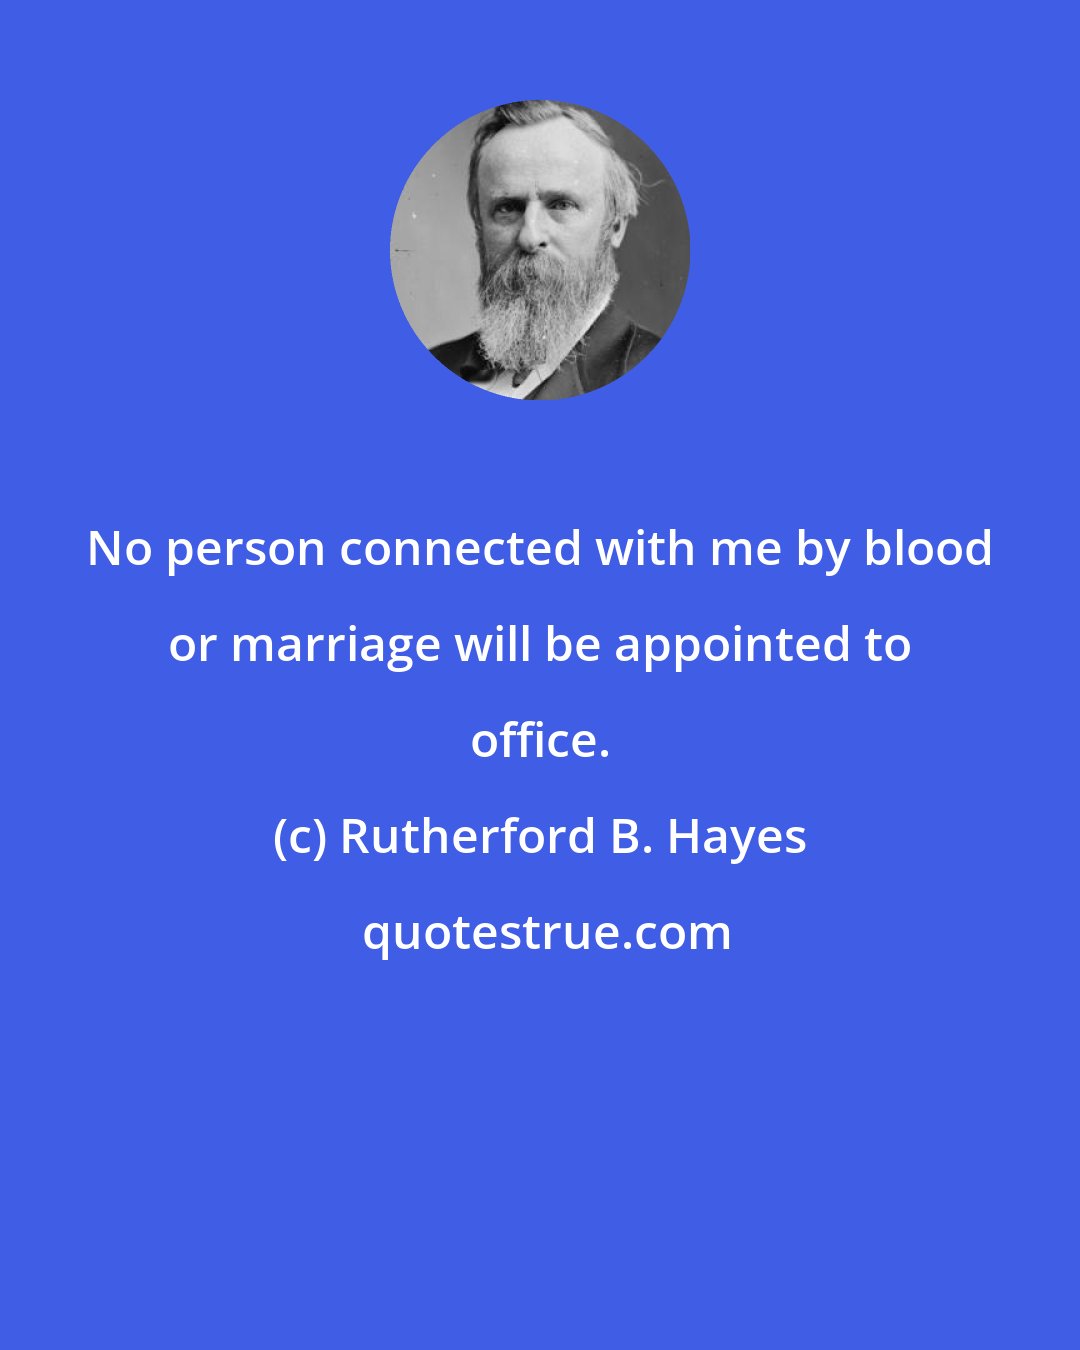 Rutherford B. Hayes: No person connected with me by blood or marriage will be appointed to office.